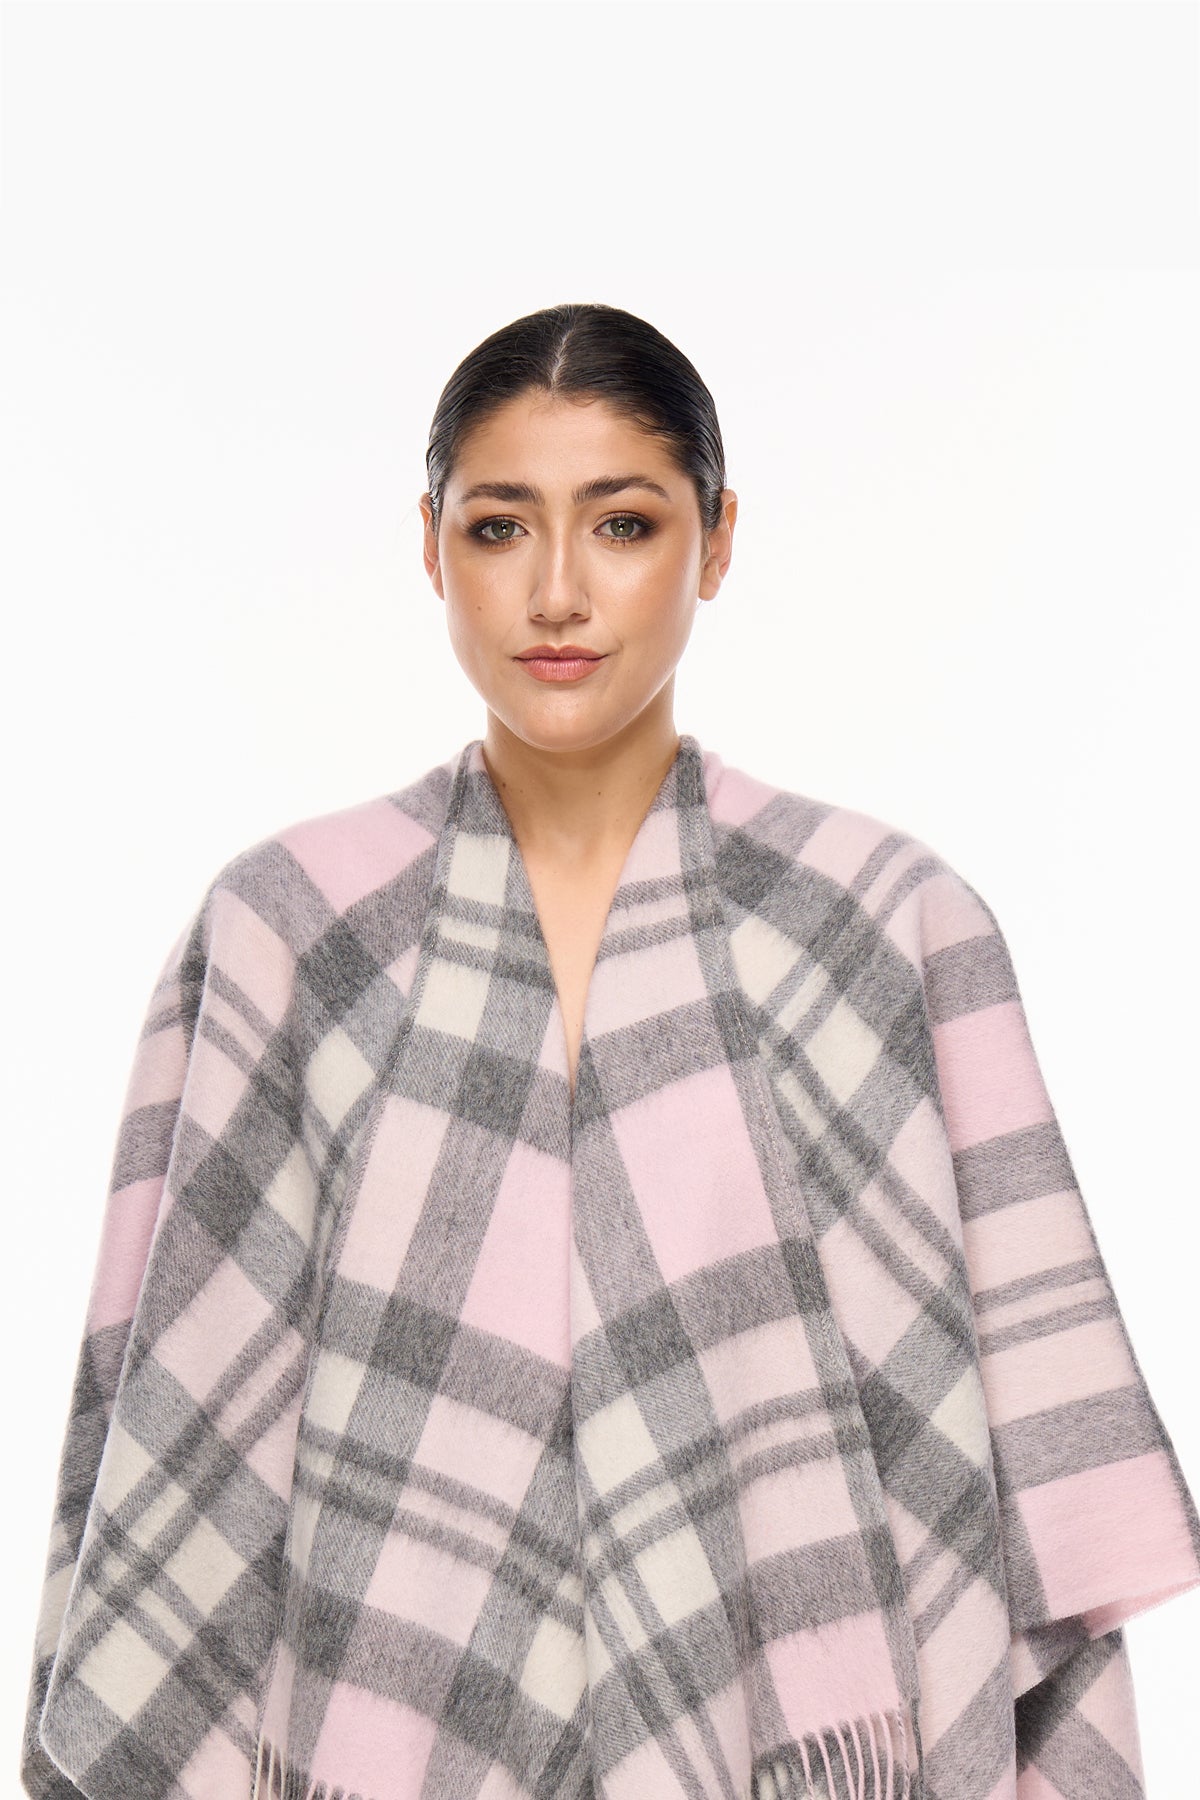 Cape DC Design Pink Poncho 100% Pure Lambswool